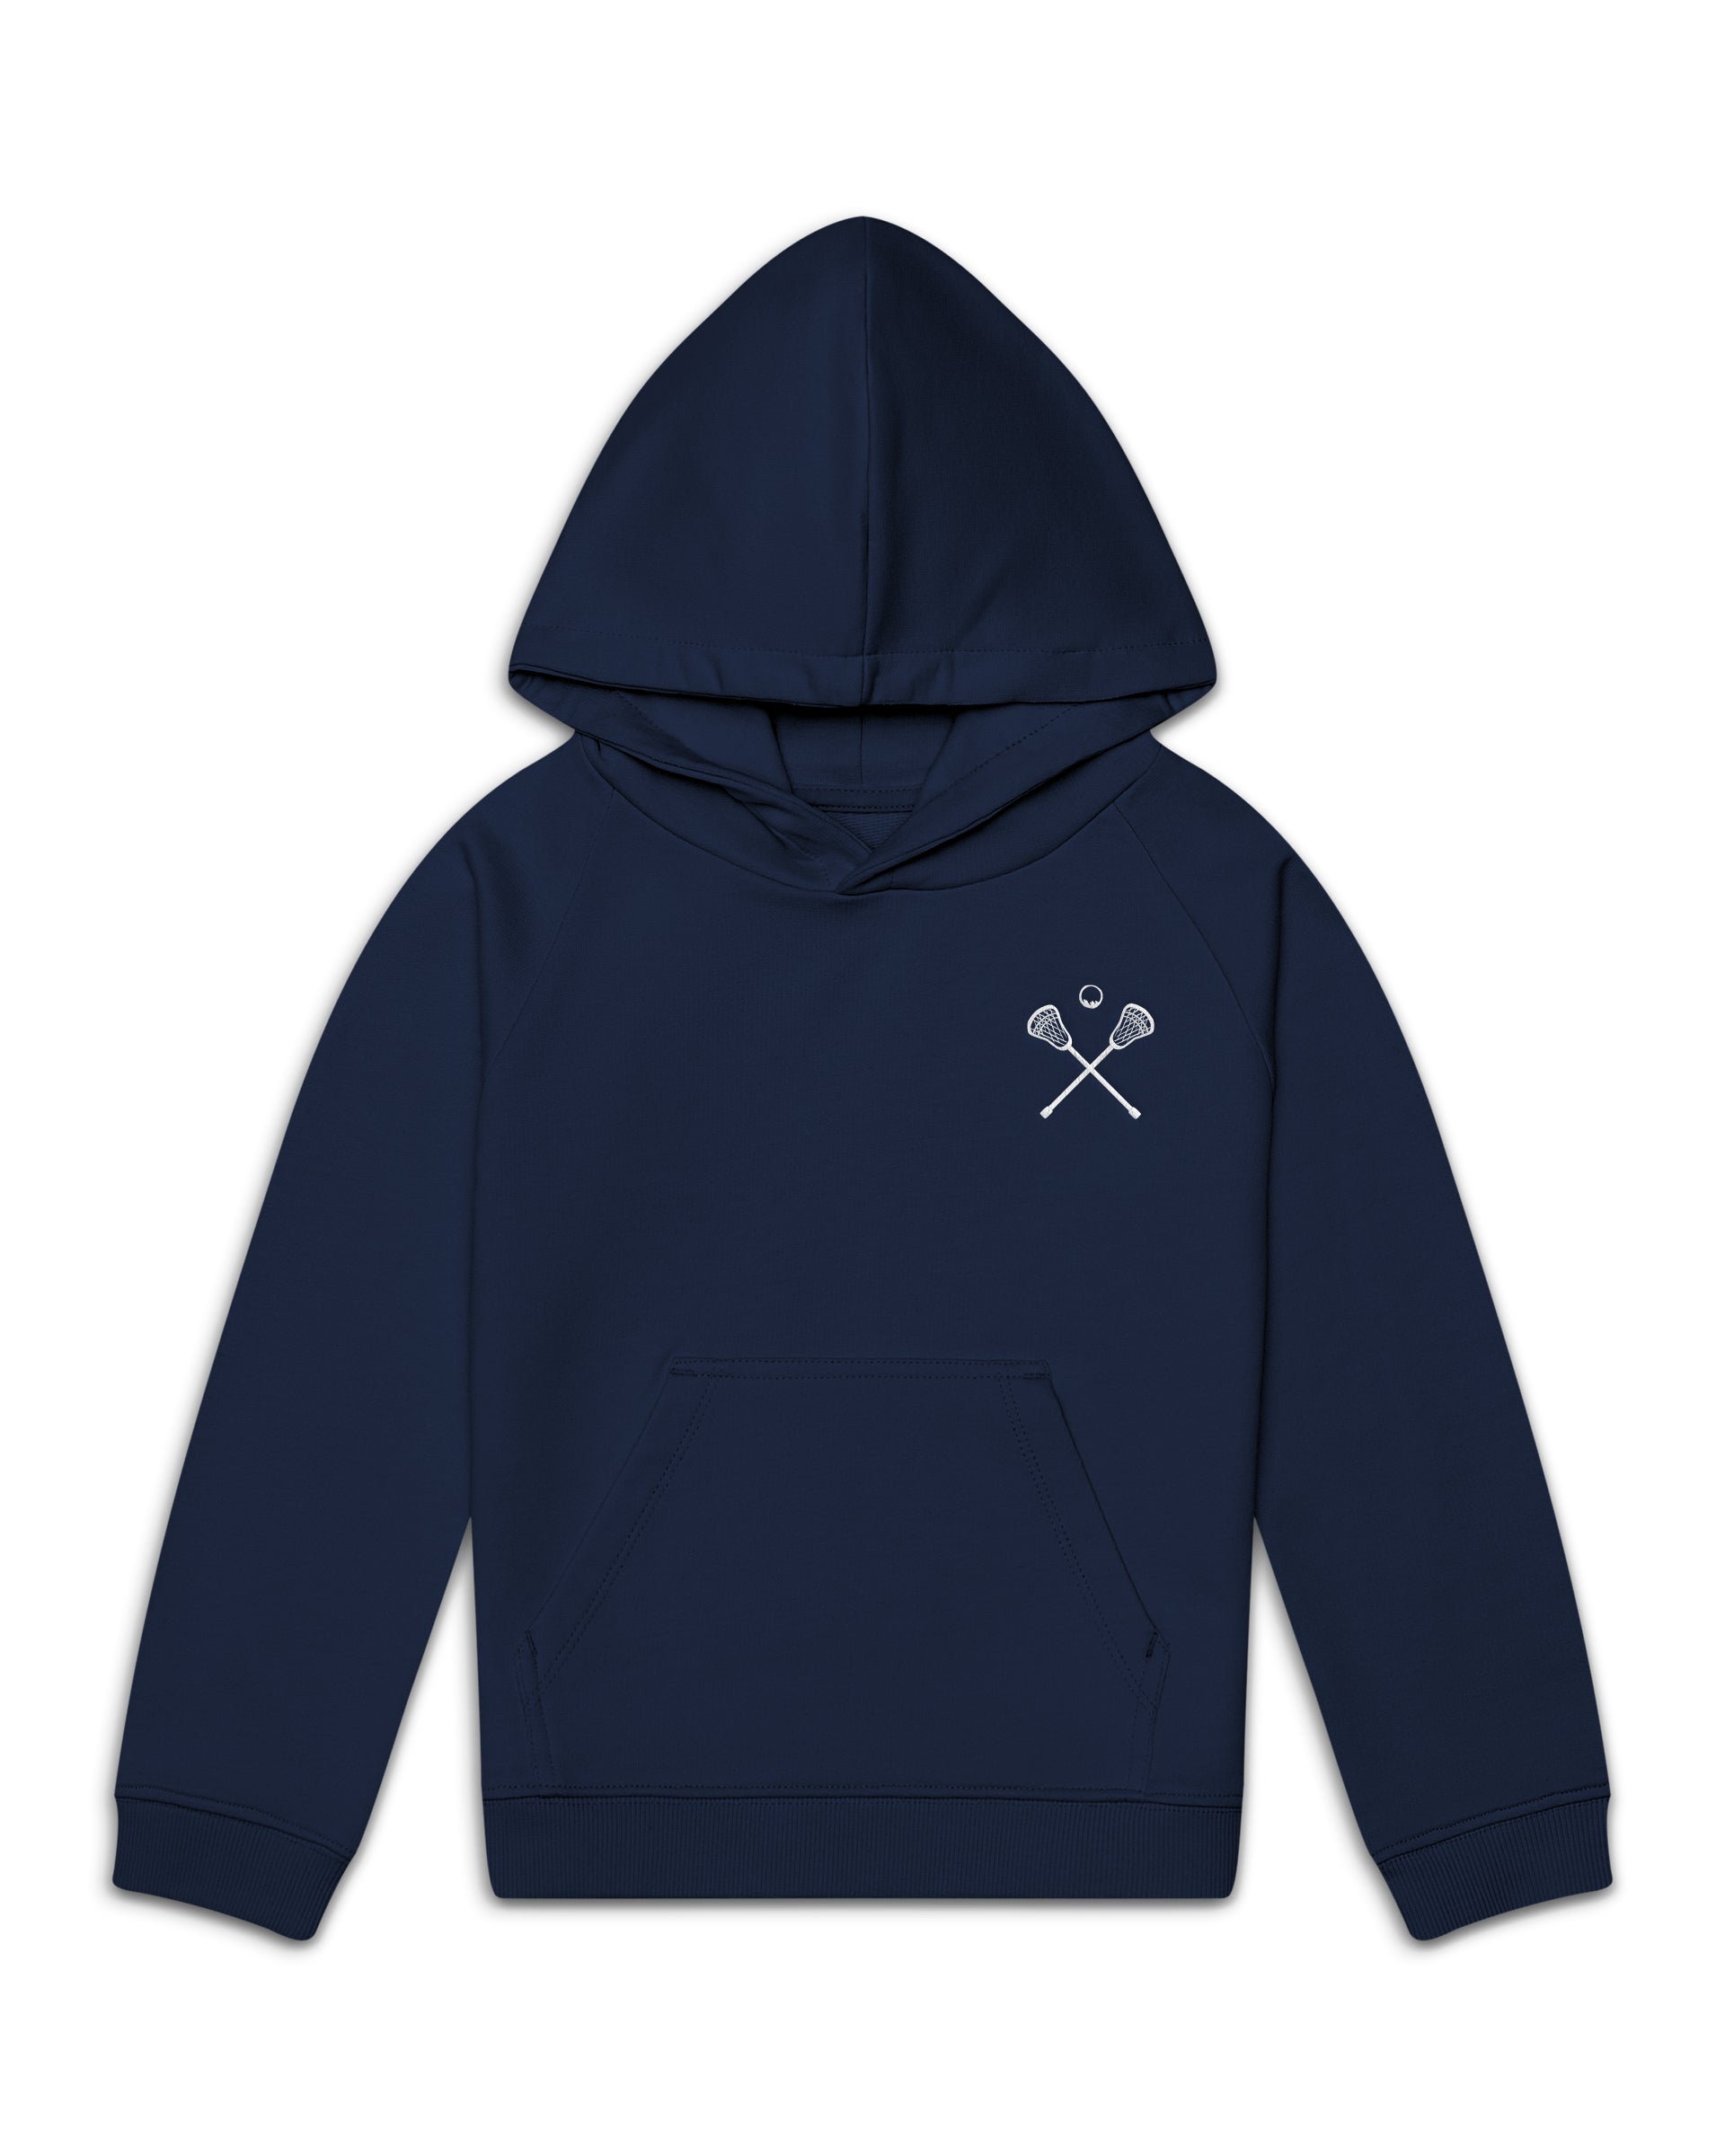 The Organic Embroidered Hoodie Sweatshirt [Navy with White Lacrosse]